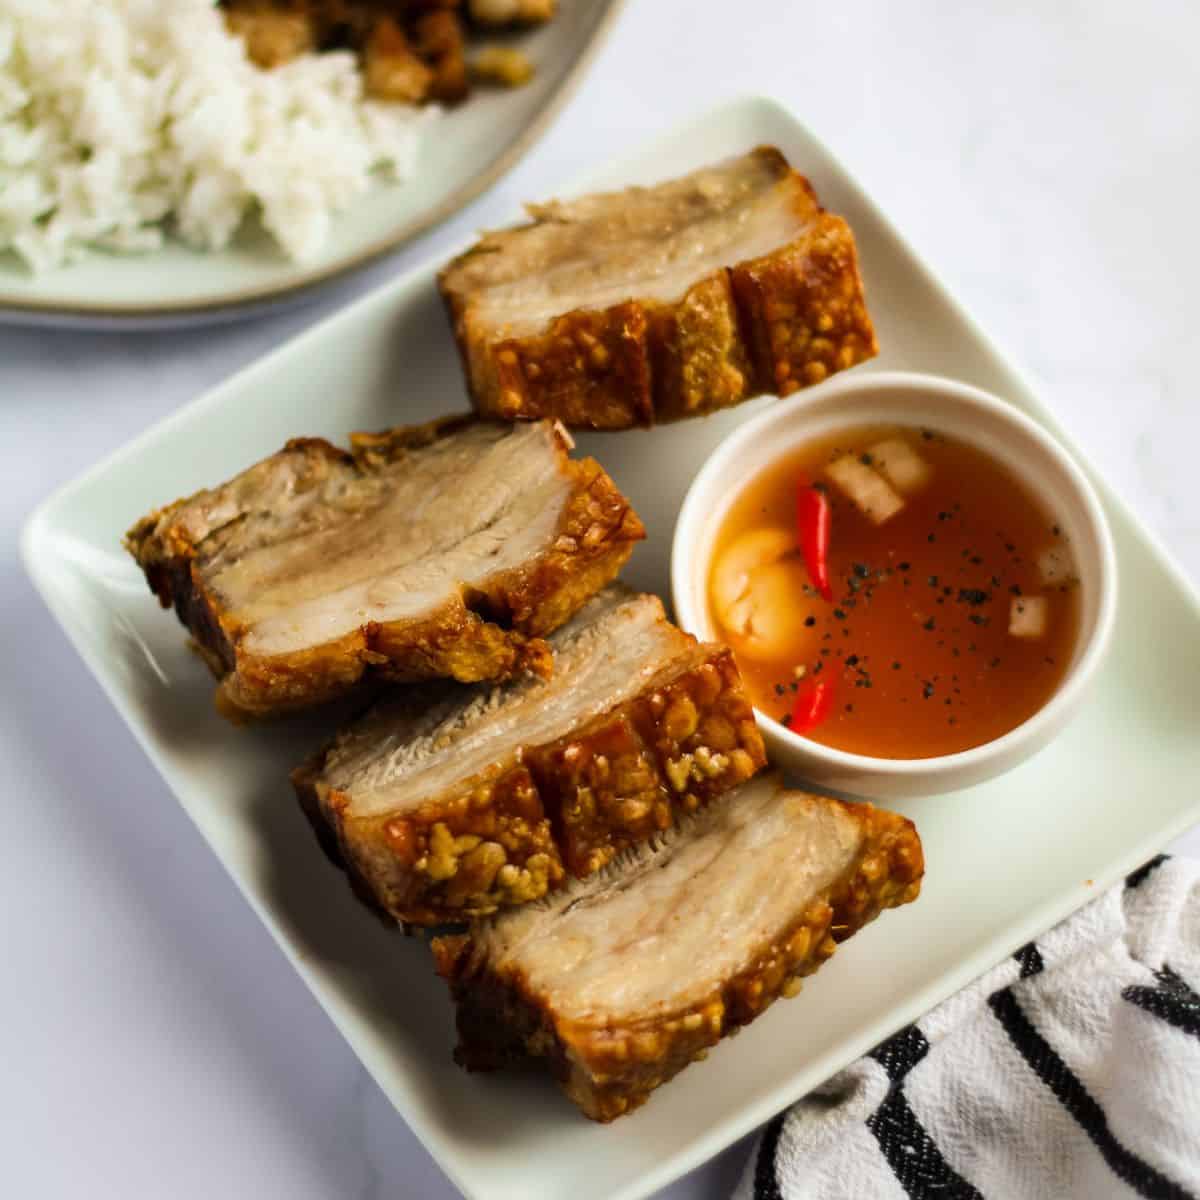 Finish dish of sliced lechon kawali in a plate.